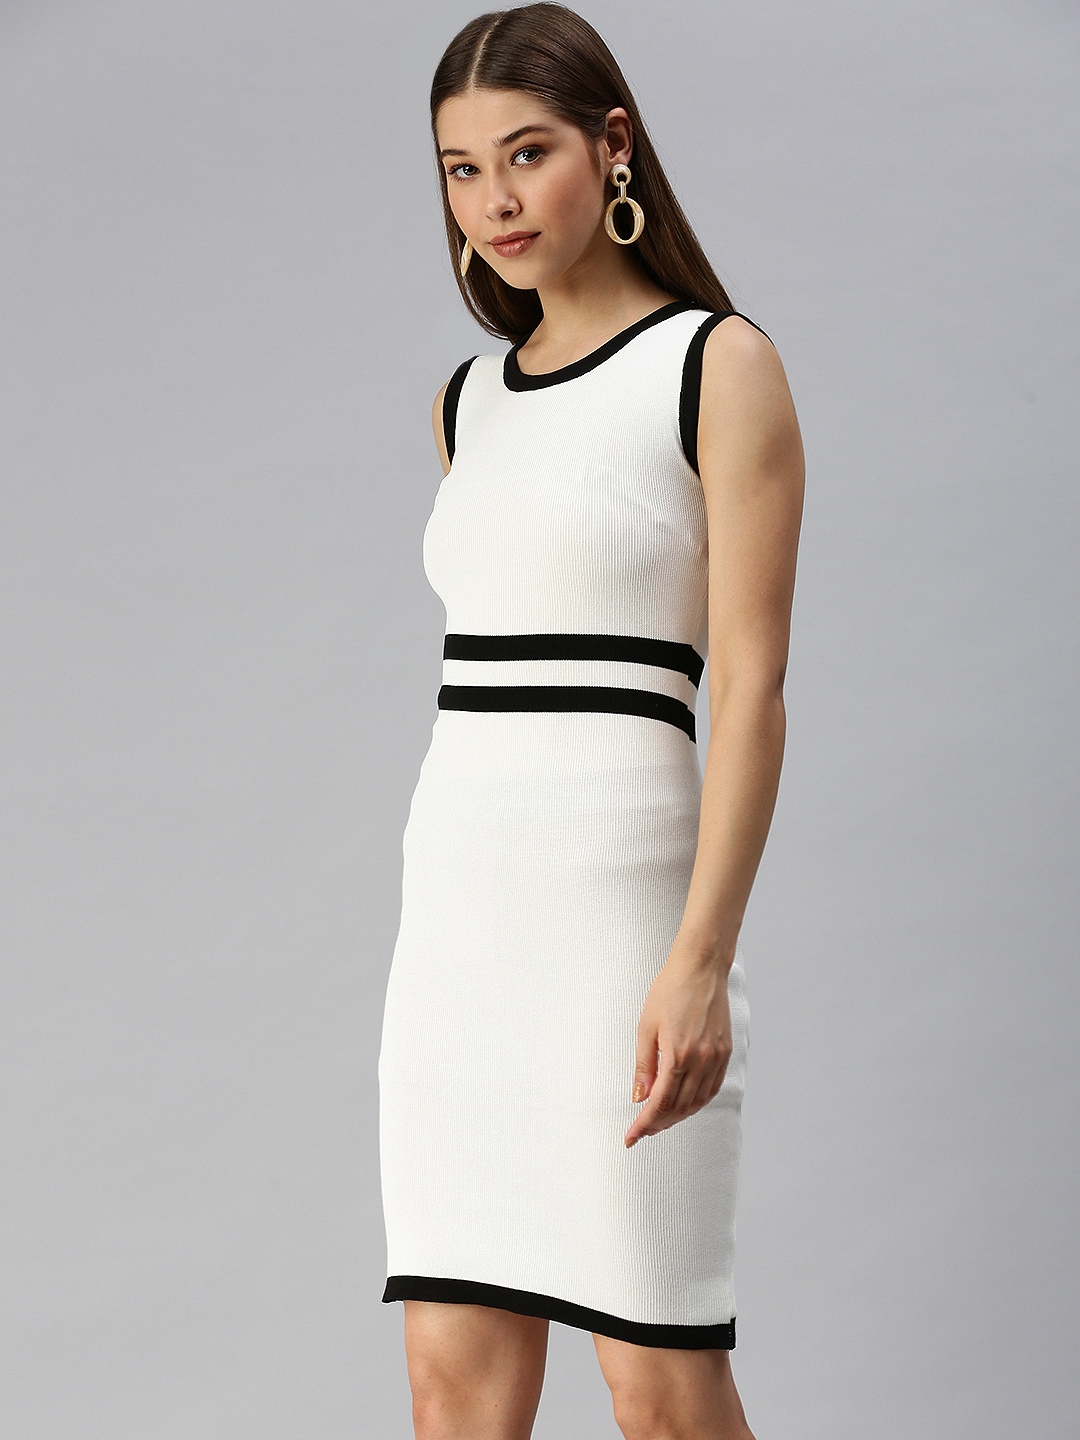 Women's White Synthetic Solid Dresses